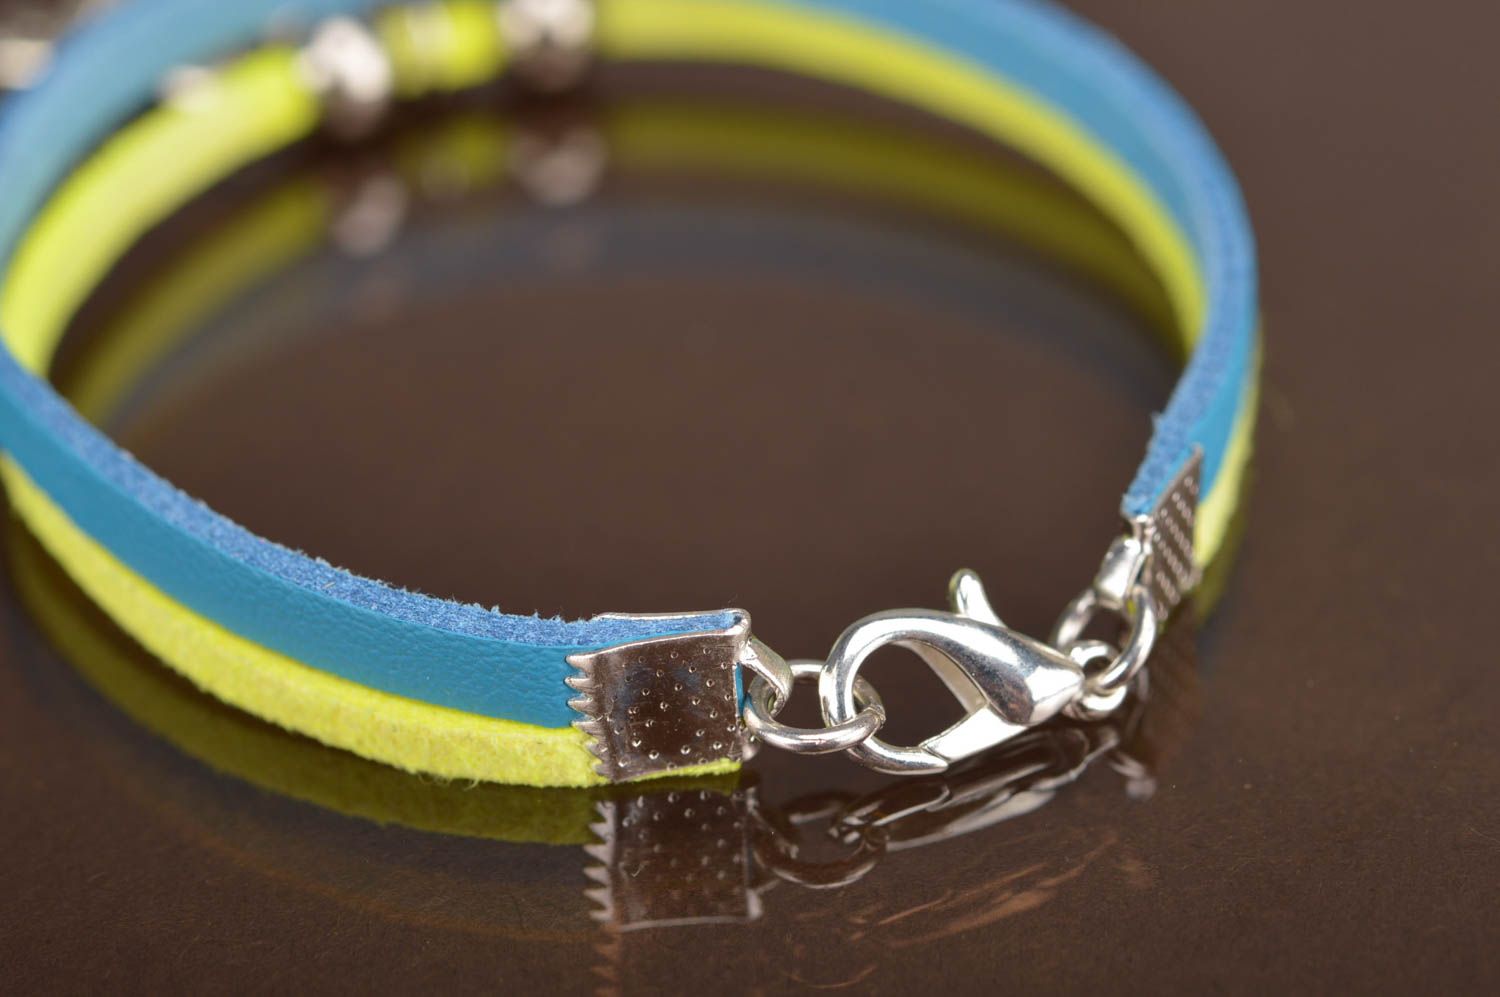 Handmade yellow and blue genuine leather and suede wrist bracelet with charm photo 5